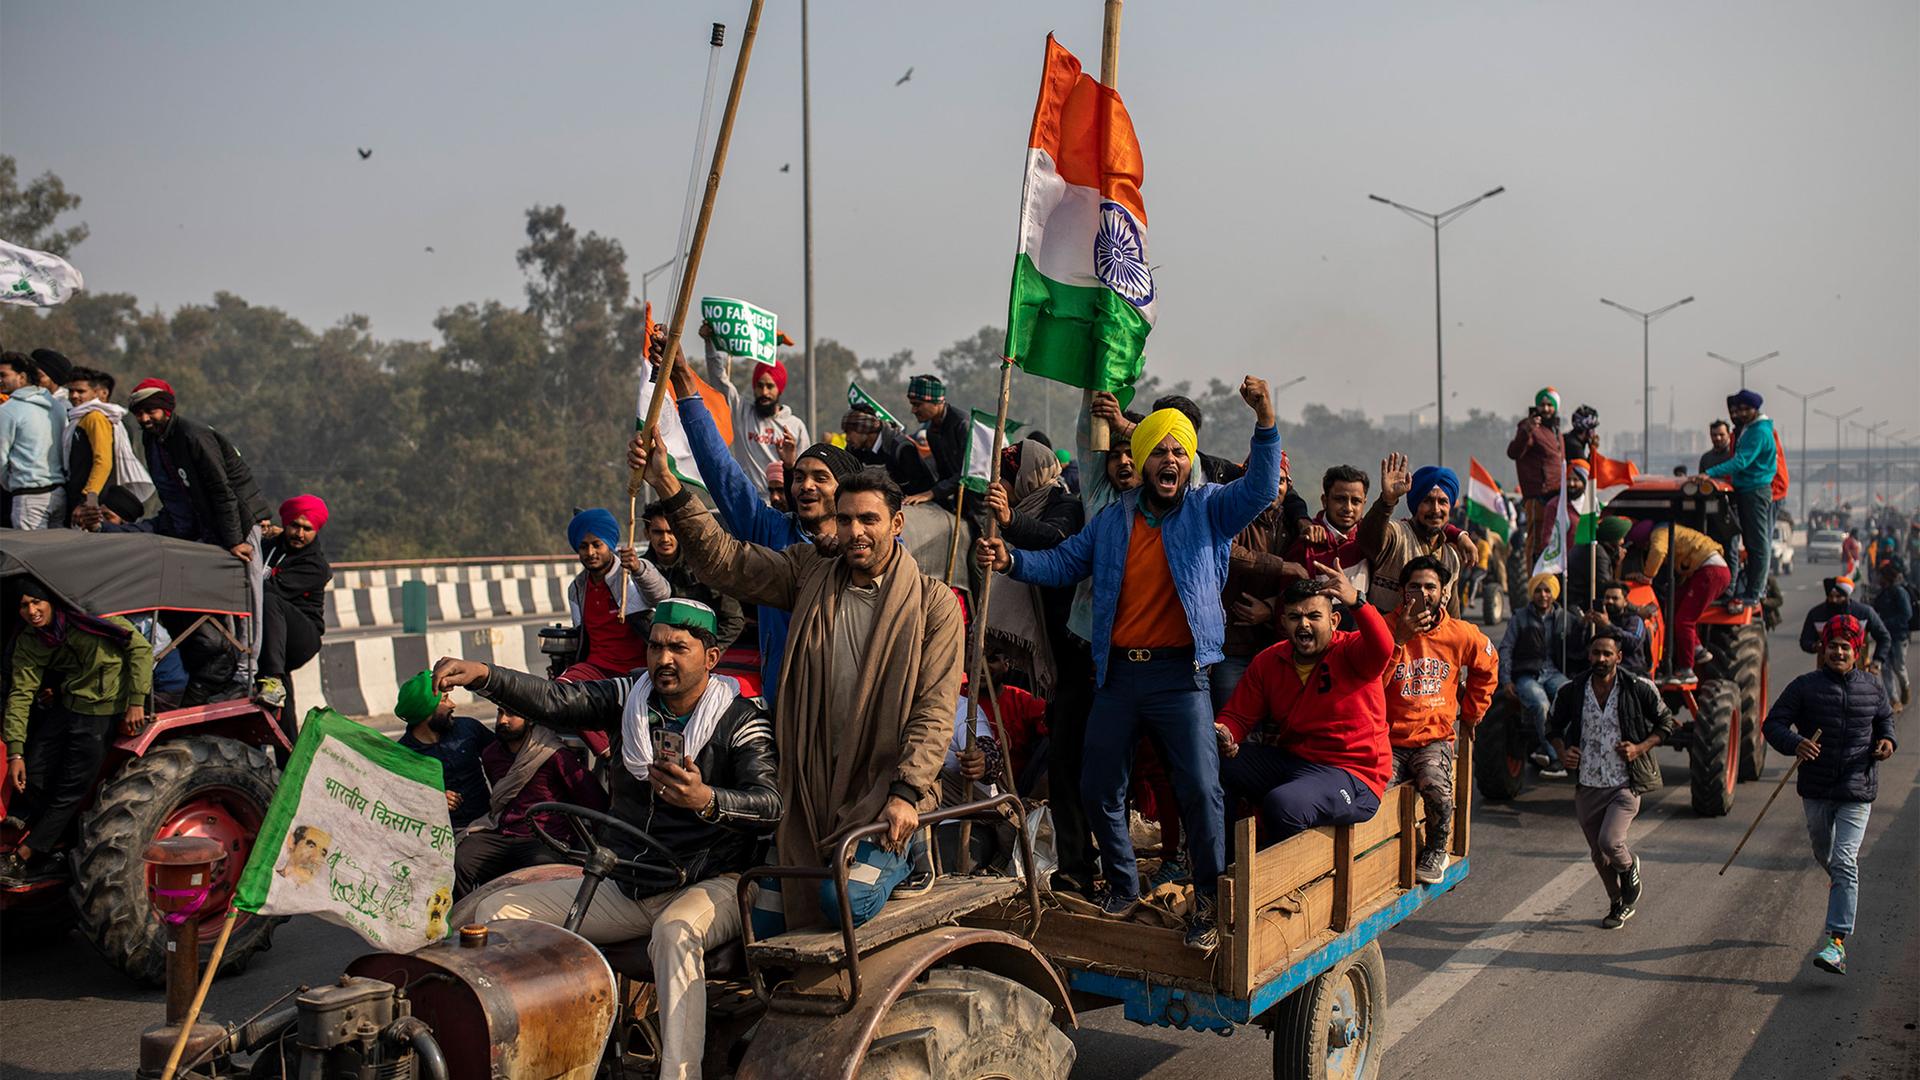 Protesting farmers ride tractors and shout slogans as they march to the capital, breaking police barricades, during India's Republic Day celebrations in New Delhi, India